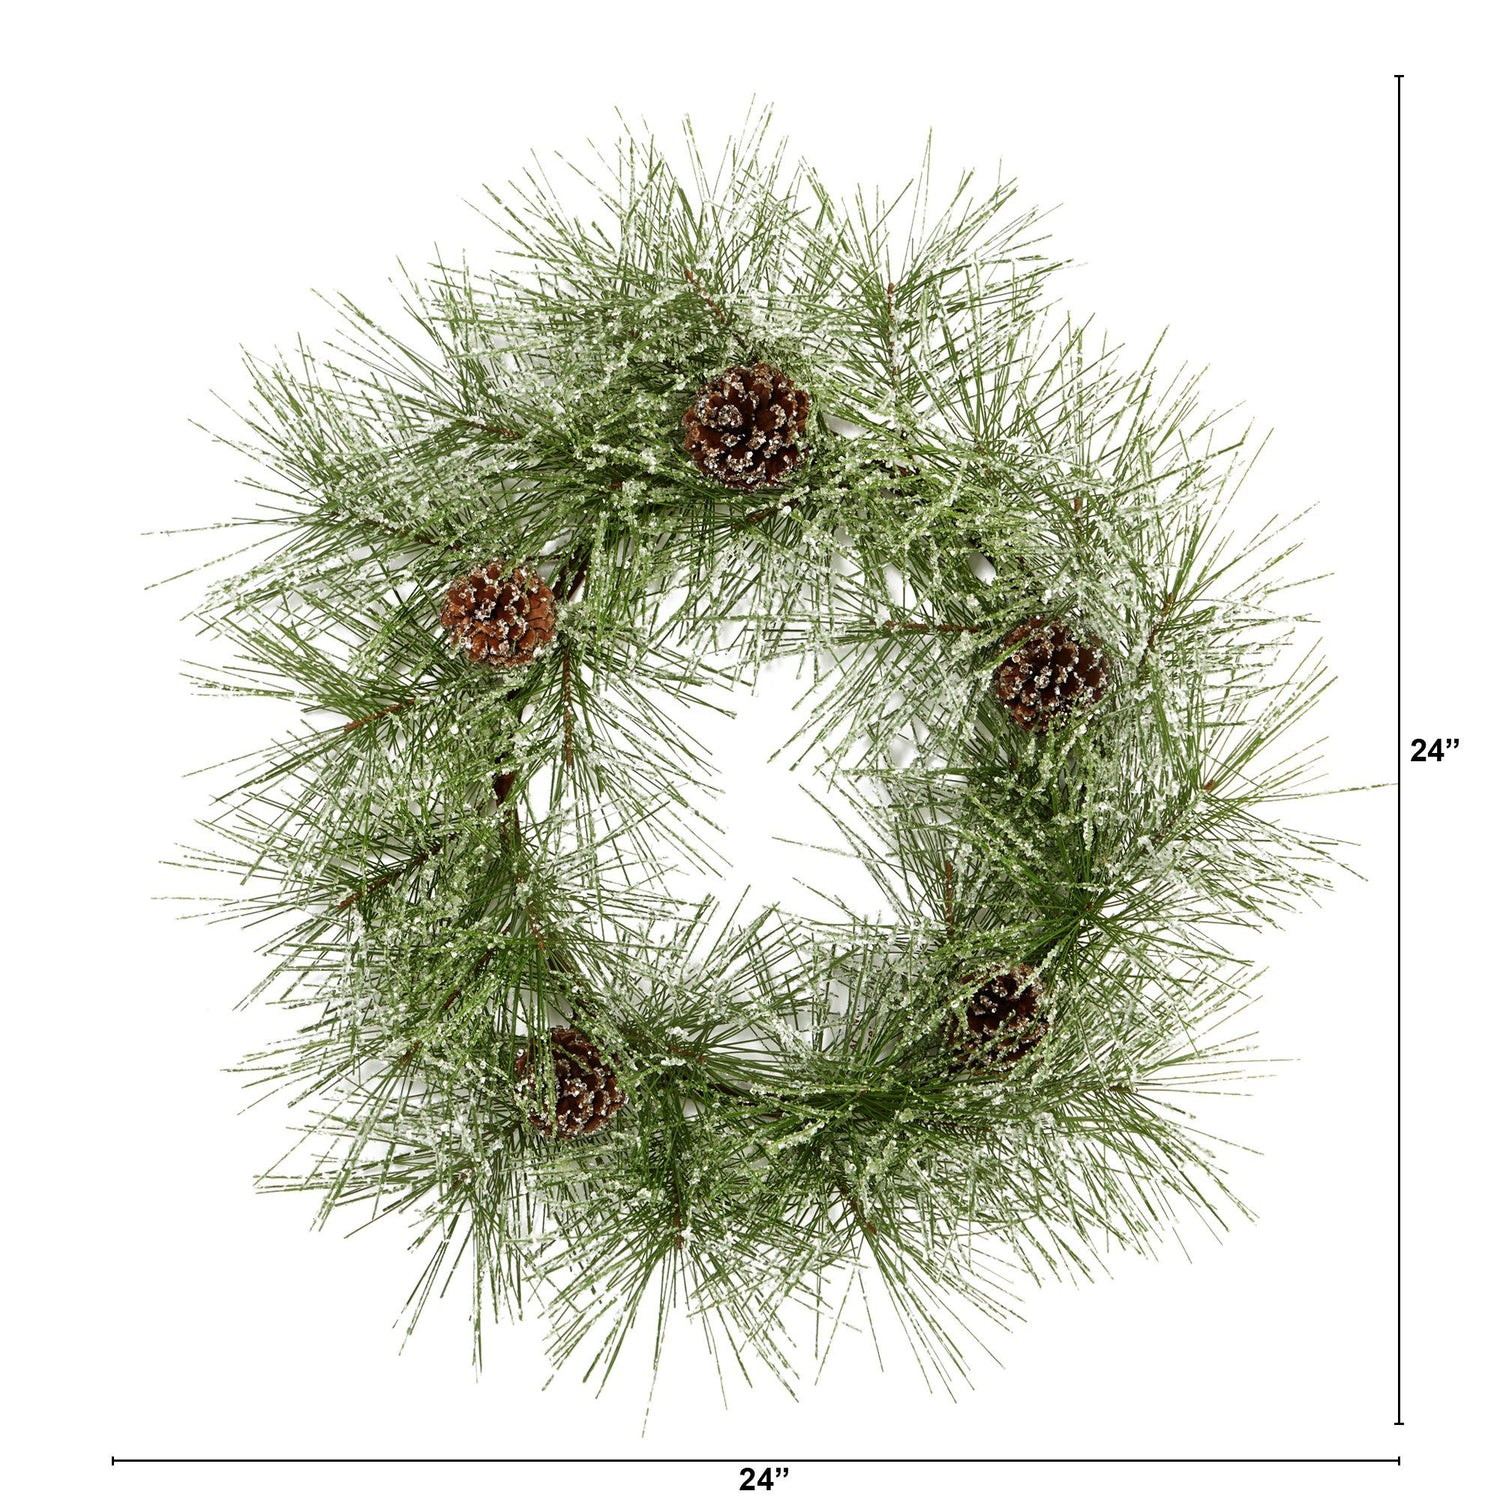 24” Iced Pine Artificial Wreath with Pine Cones